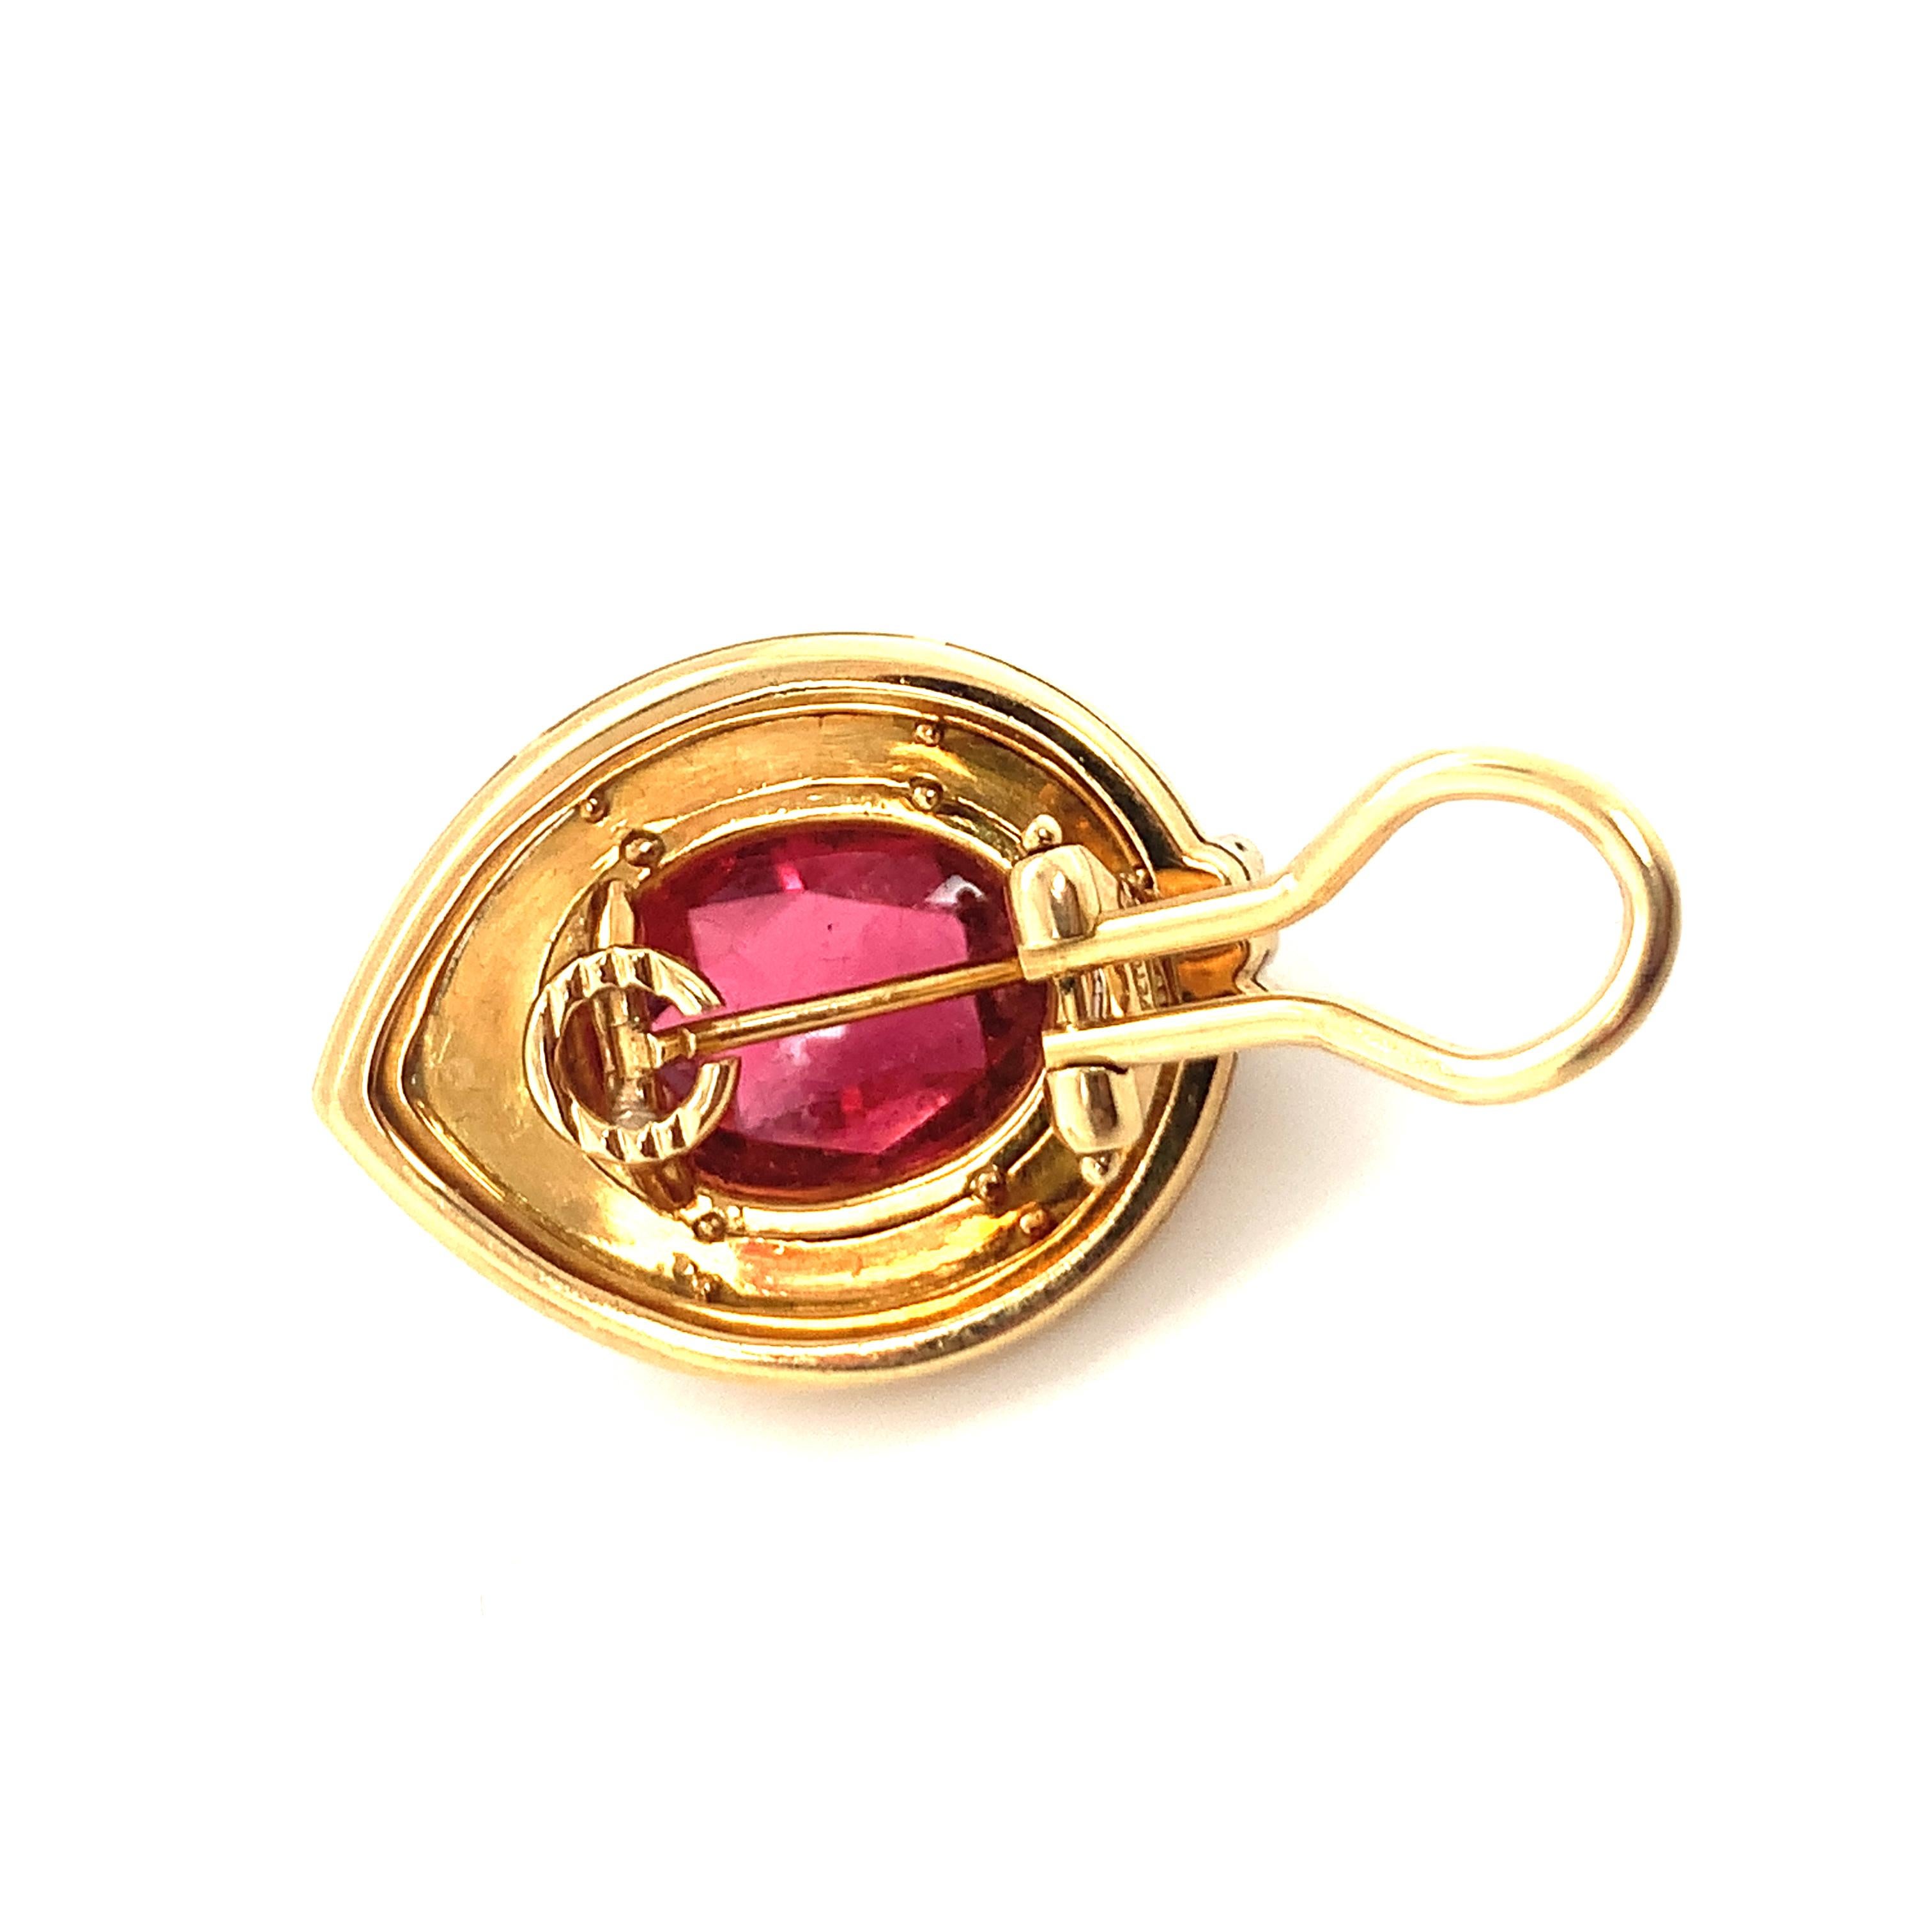 One pair of pink tourmaline 18K yellow gold earclips featuring two bezel set, multi-faceted mixed oval cut pink tourmalines weighing 12 ct. in total and measuring 13 x 10 millimeters in size. The earrings feature a multi-level, high polish gold